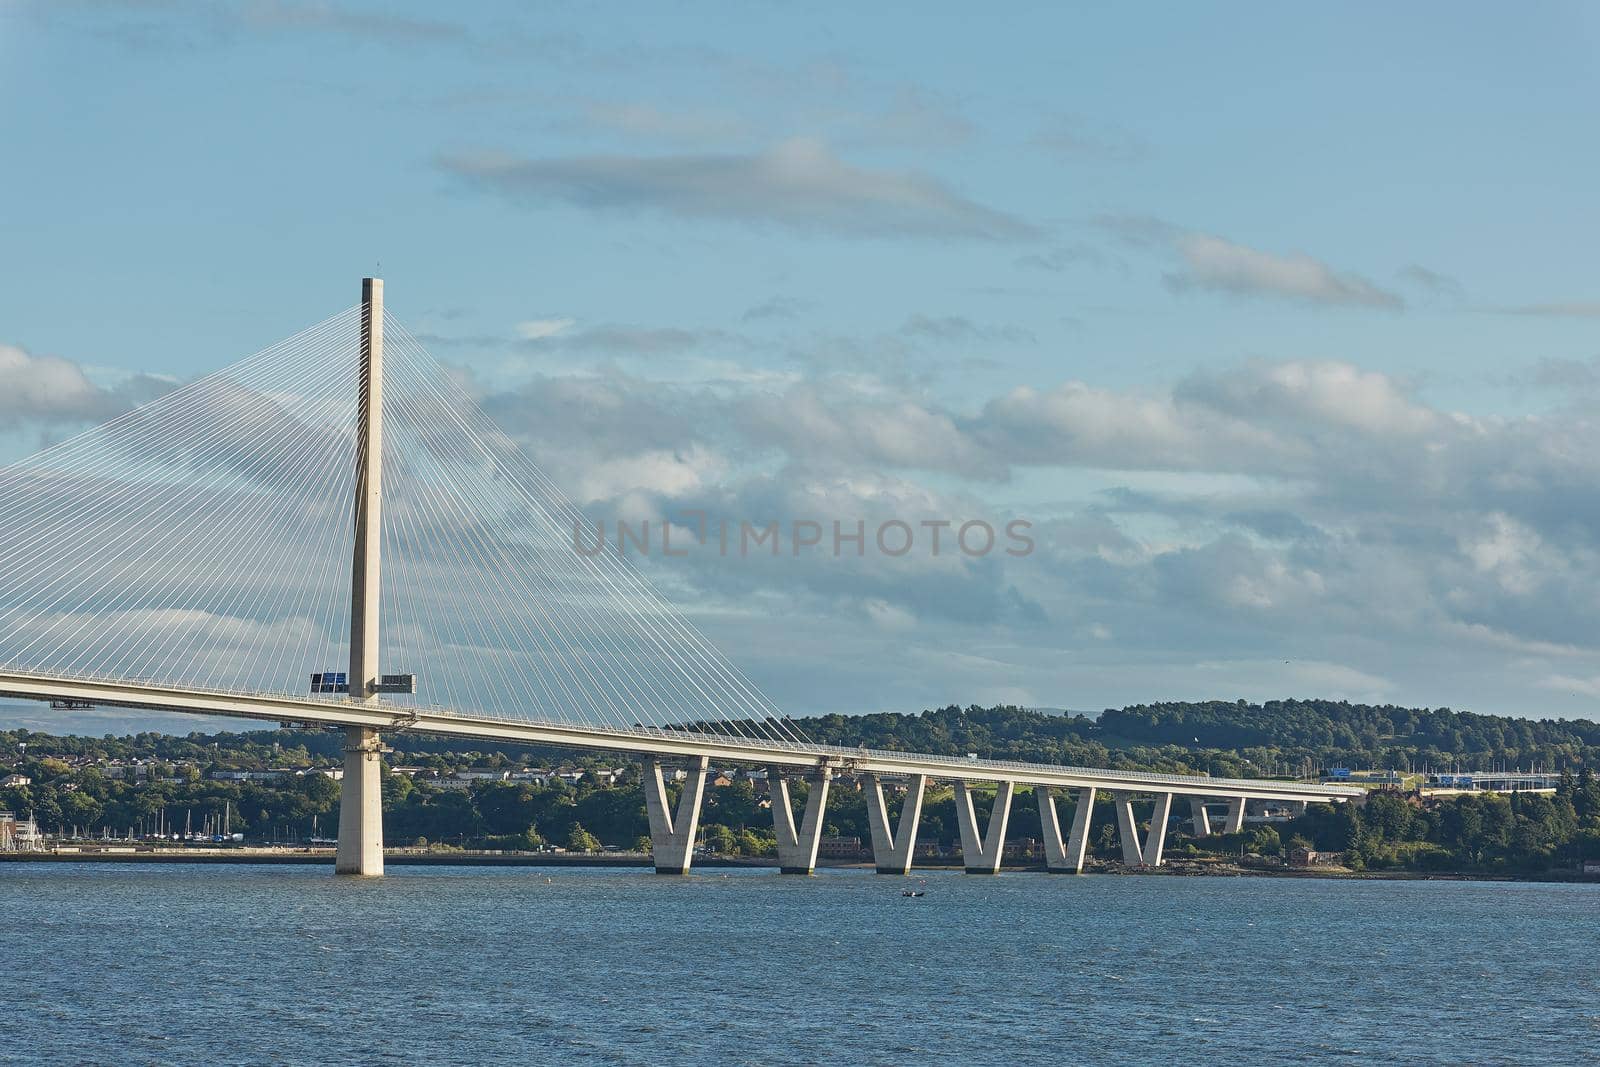 The new Queensferry Crossing bridge over the Firth of Forth in Edinburgh Scotland